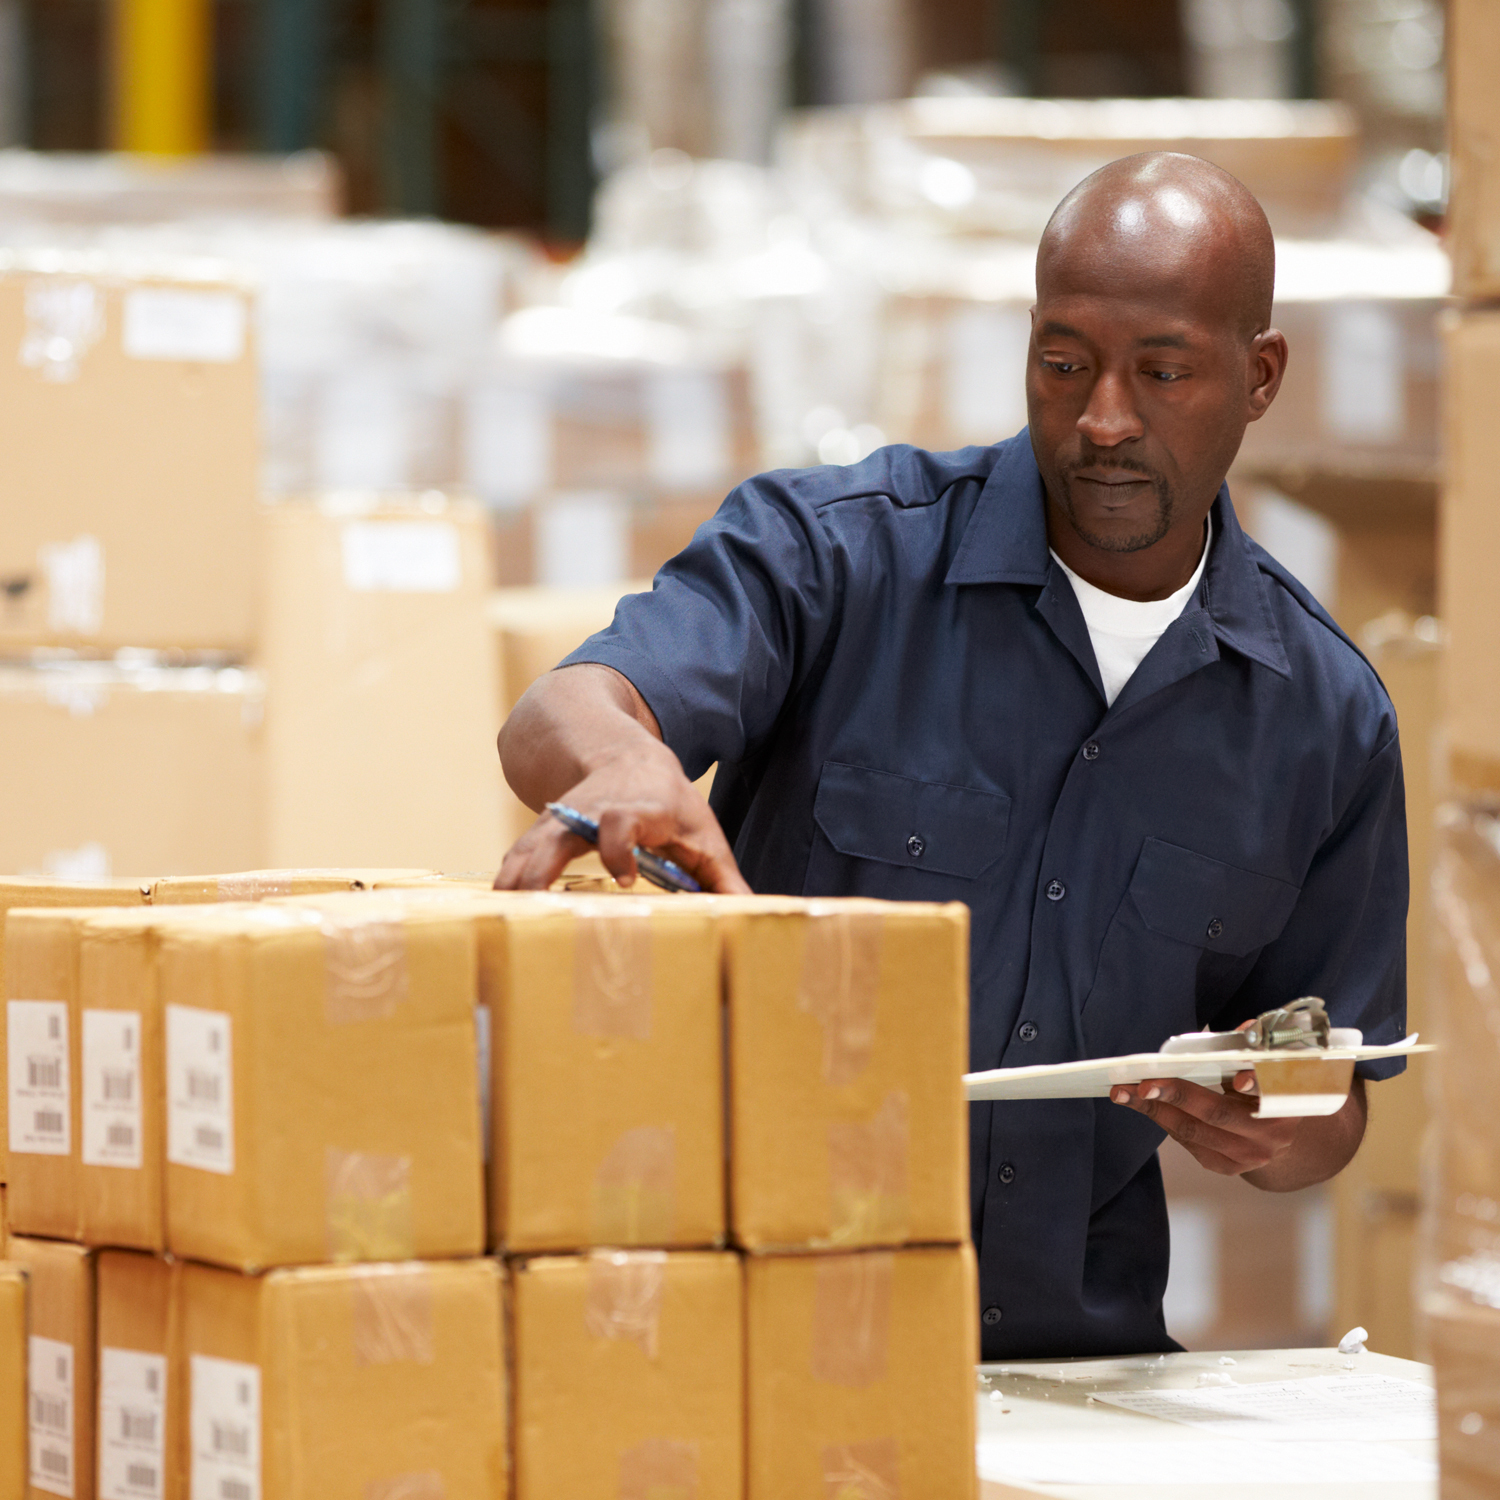 Man in warehouse checking parcels